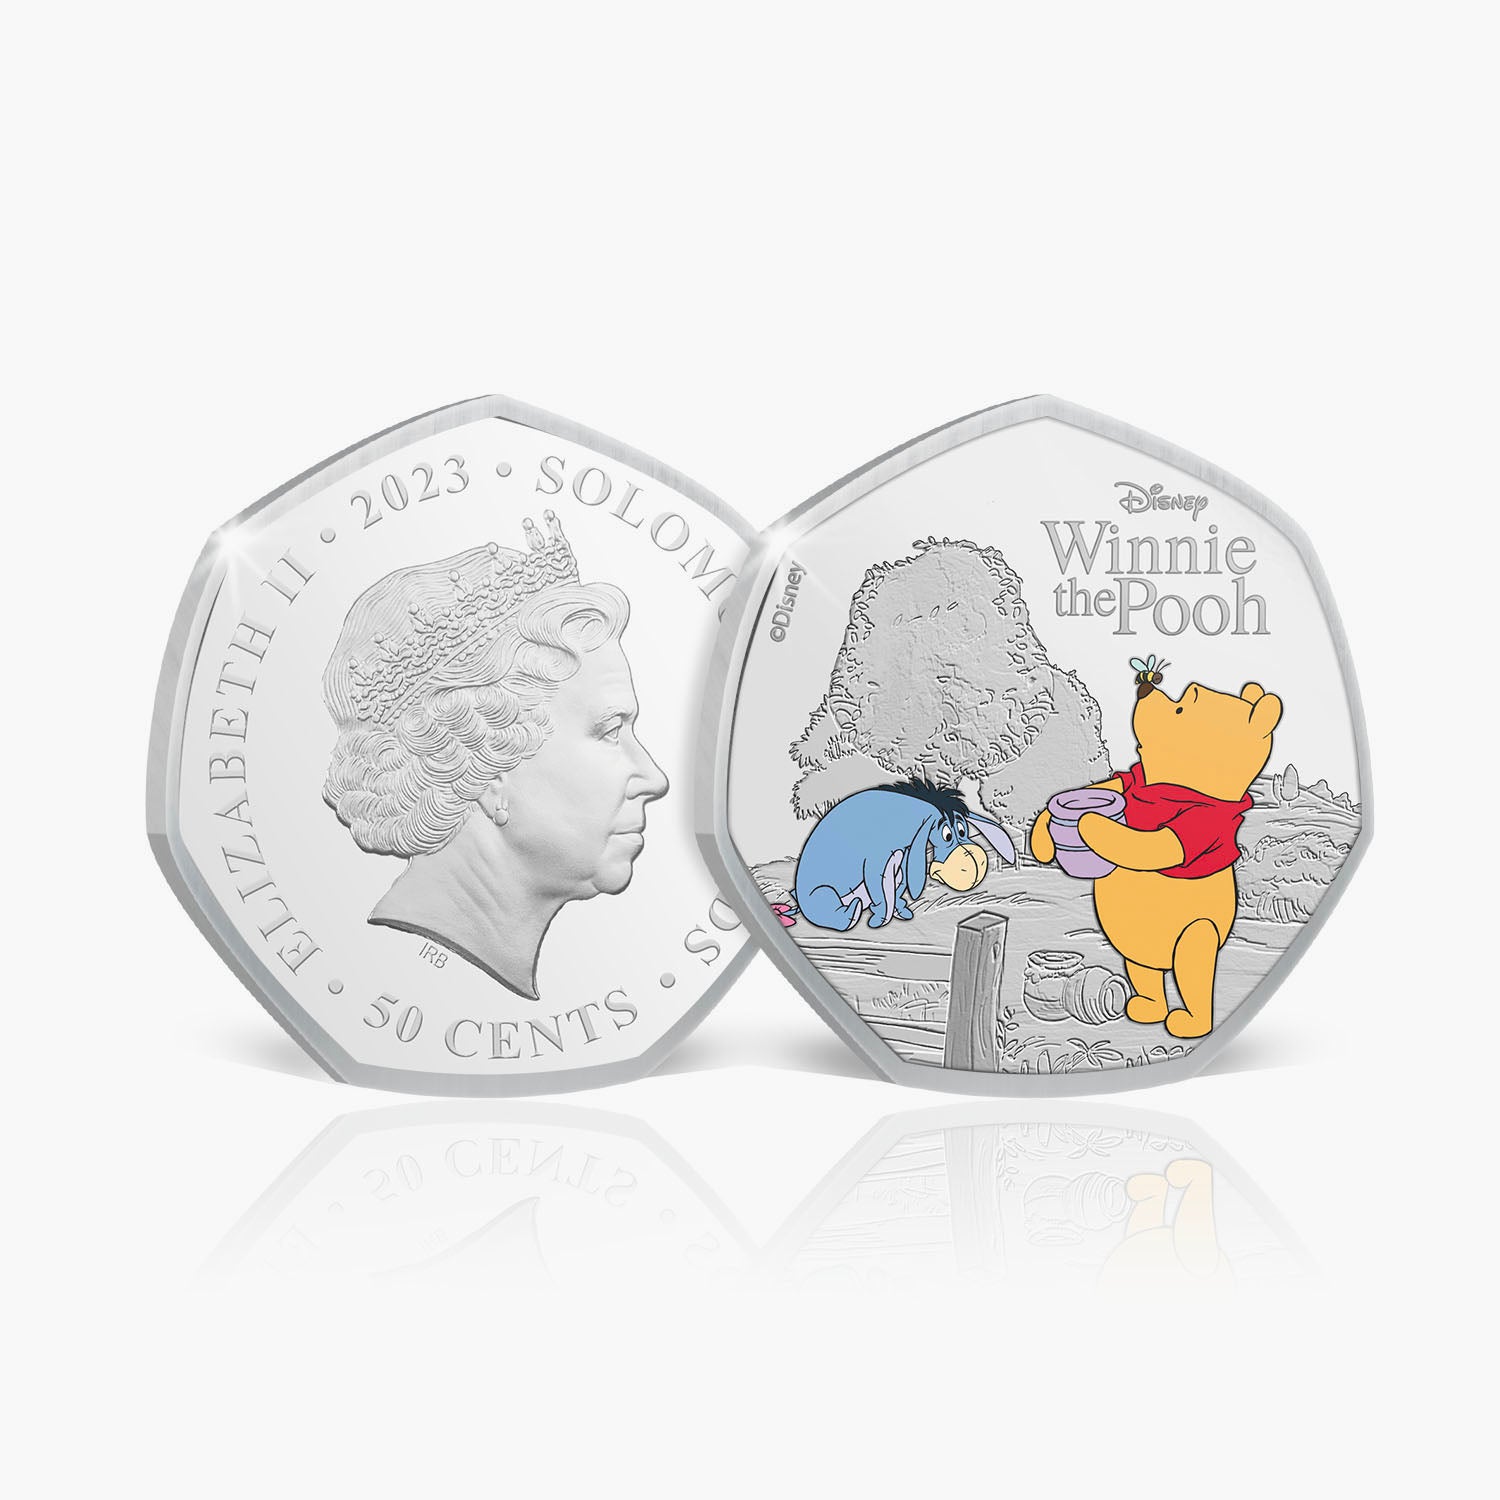 The Winnie the Pooh 2023 Pooh and Eeyore Coin